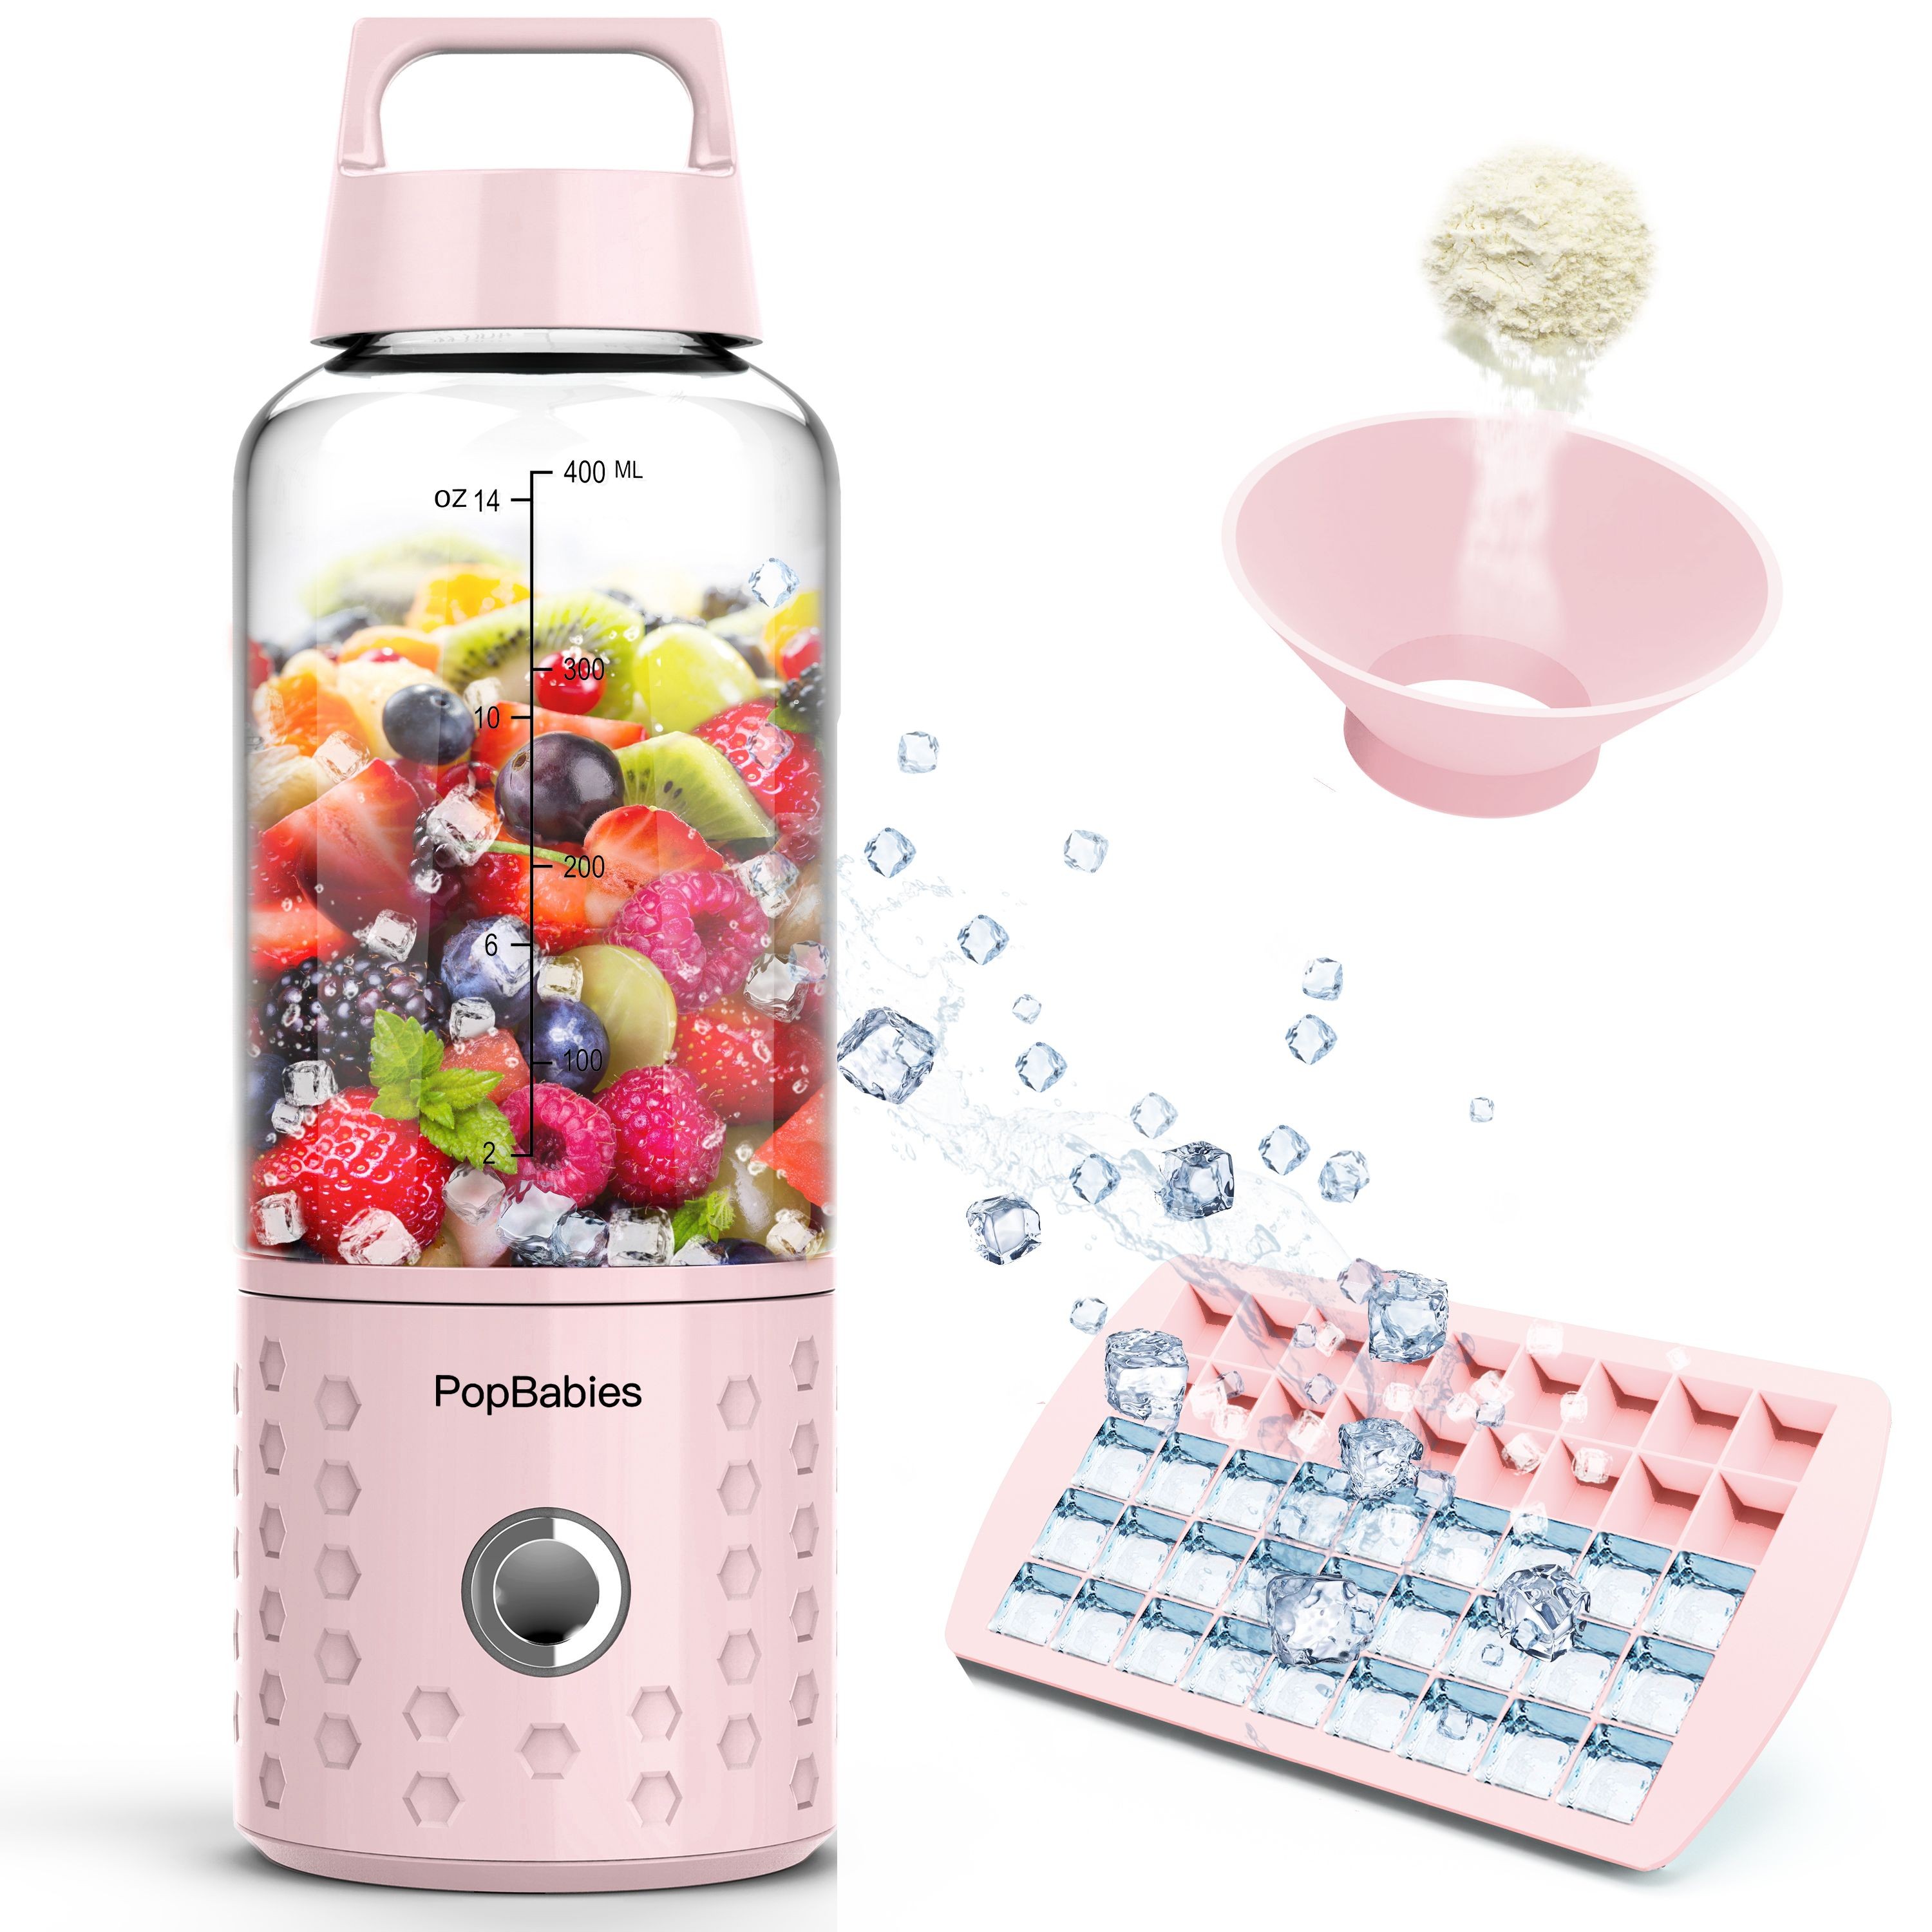 PopBabies Portable Blender, Smoothie Blender for Shakes and Smoothies,  Personal Blender On the go, Corolina Blue, Princess Pink, Stronger and  Faster with Ice Tray Funnel Recipe, Black